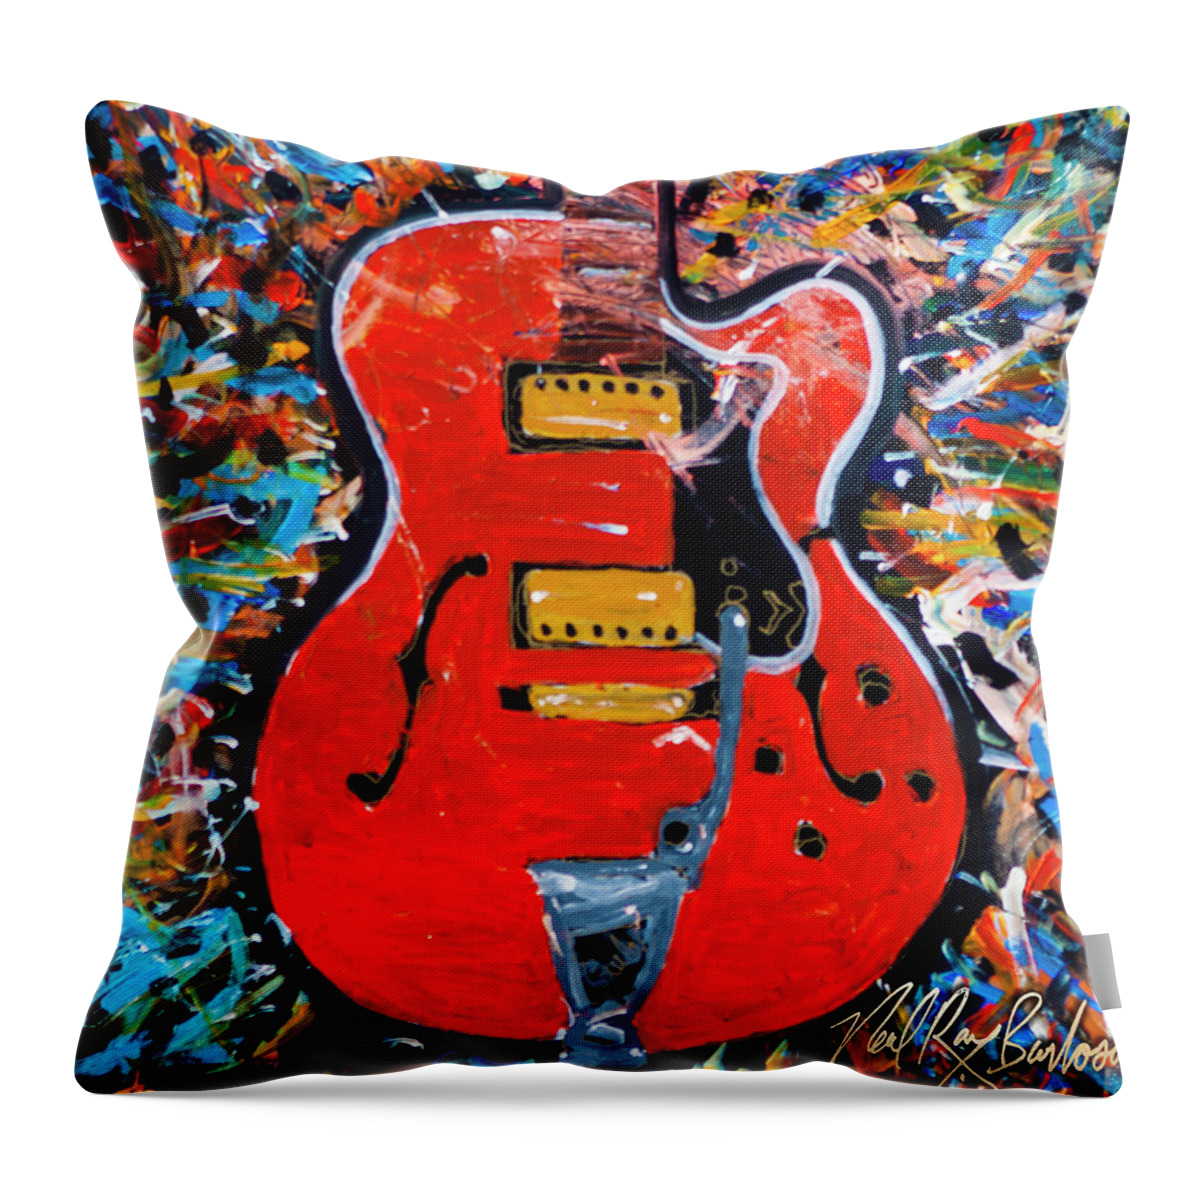 Guild Throw Pillow featuring the painting Geoffrey Mack Guild by Neal Barbosa